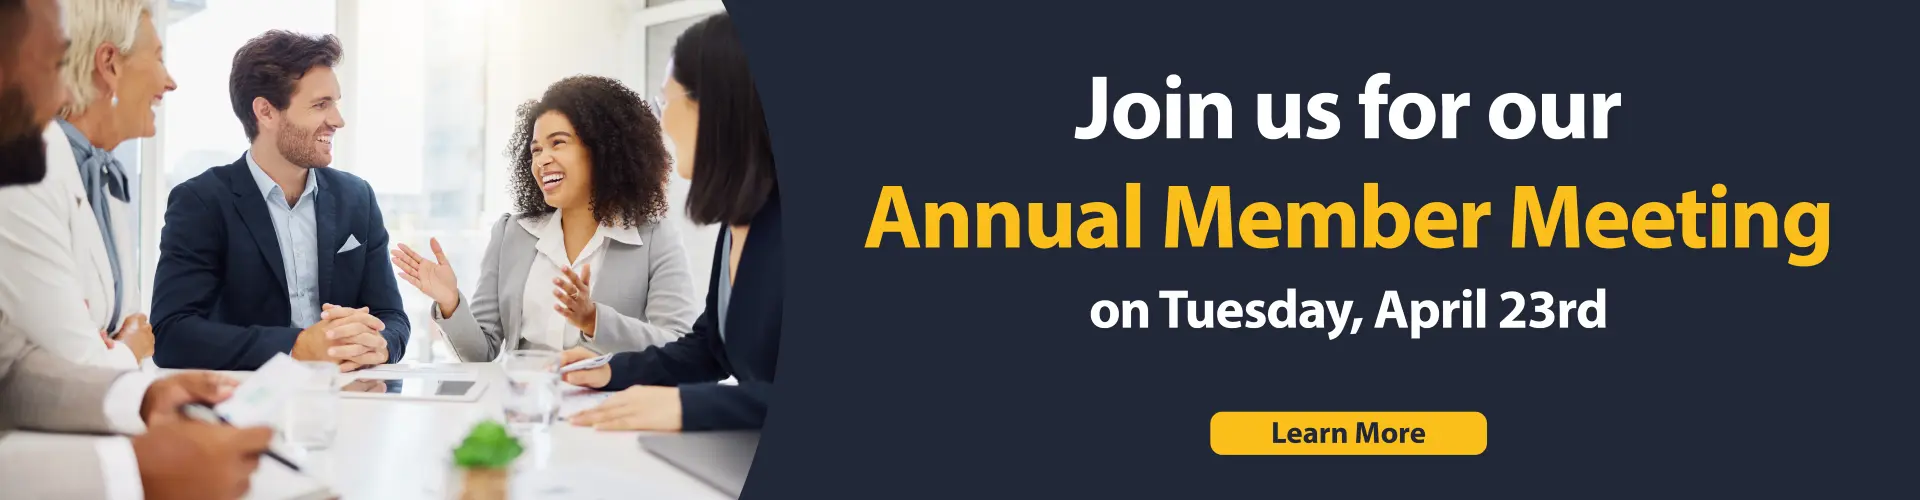 Join us for our annual member meeting